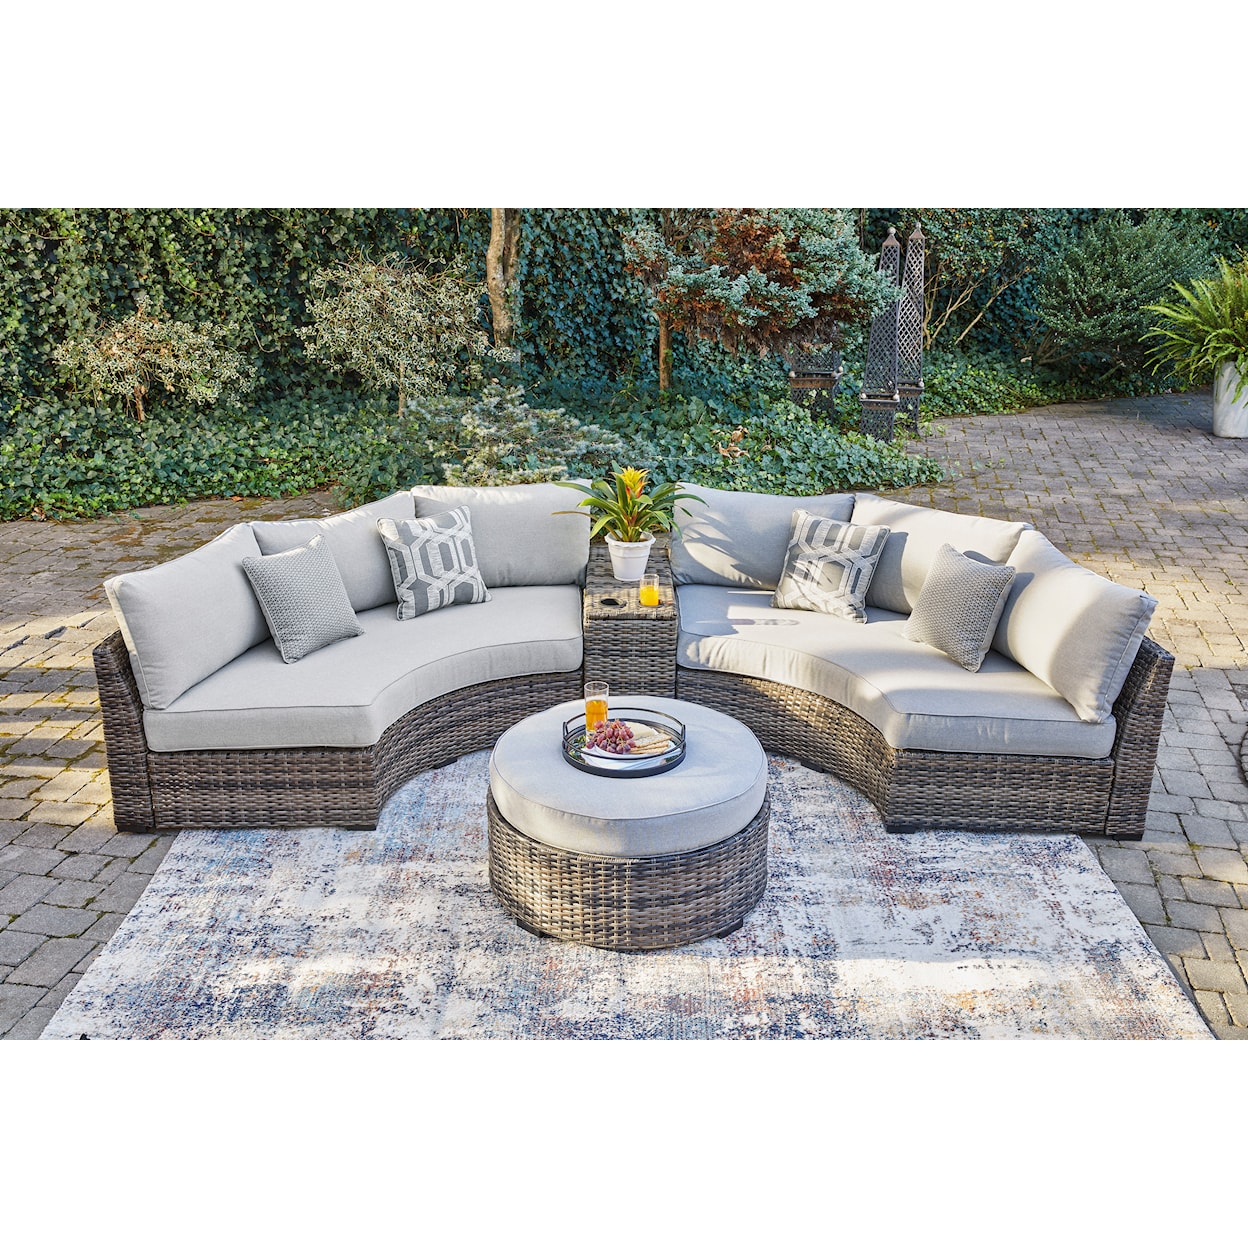 Michael Alan Select Harbor Court 3-Piece Outdoor Sectional